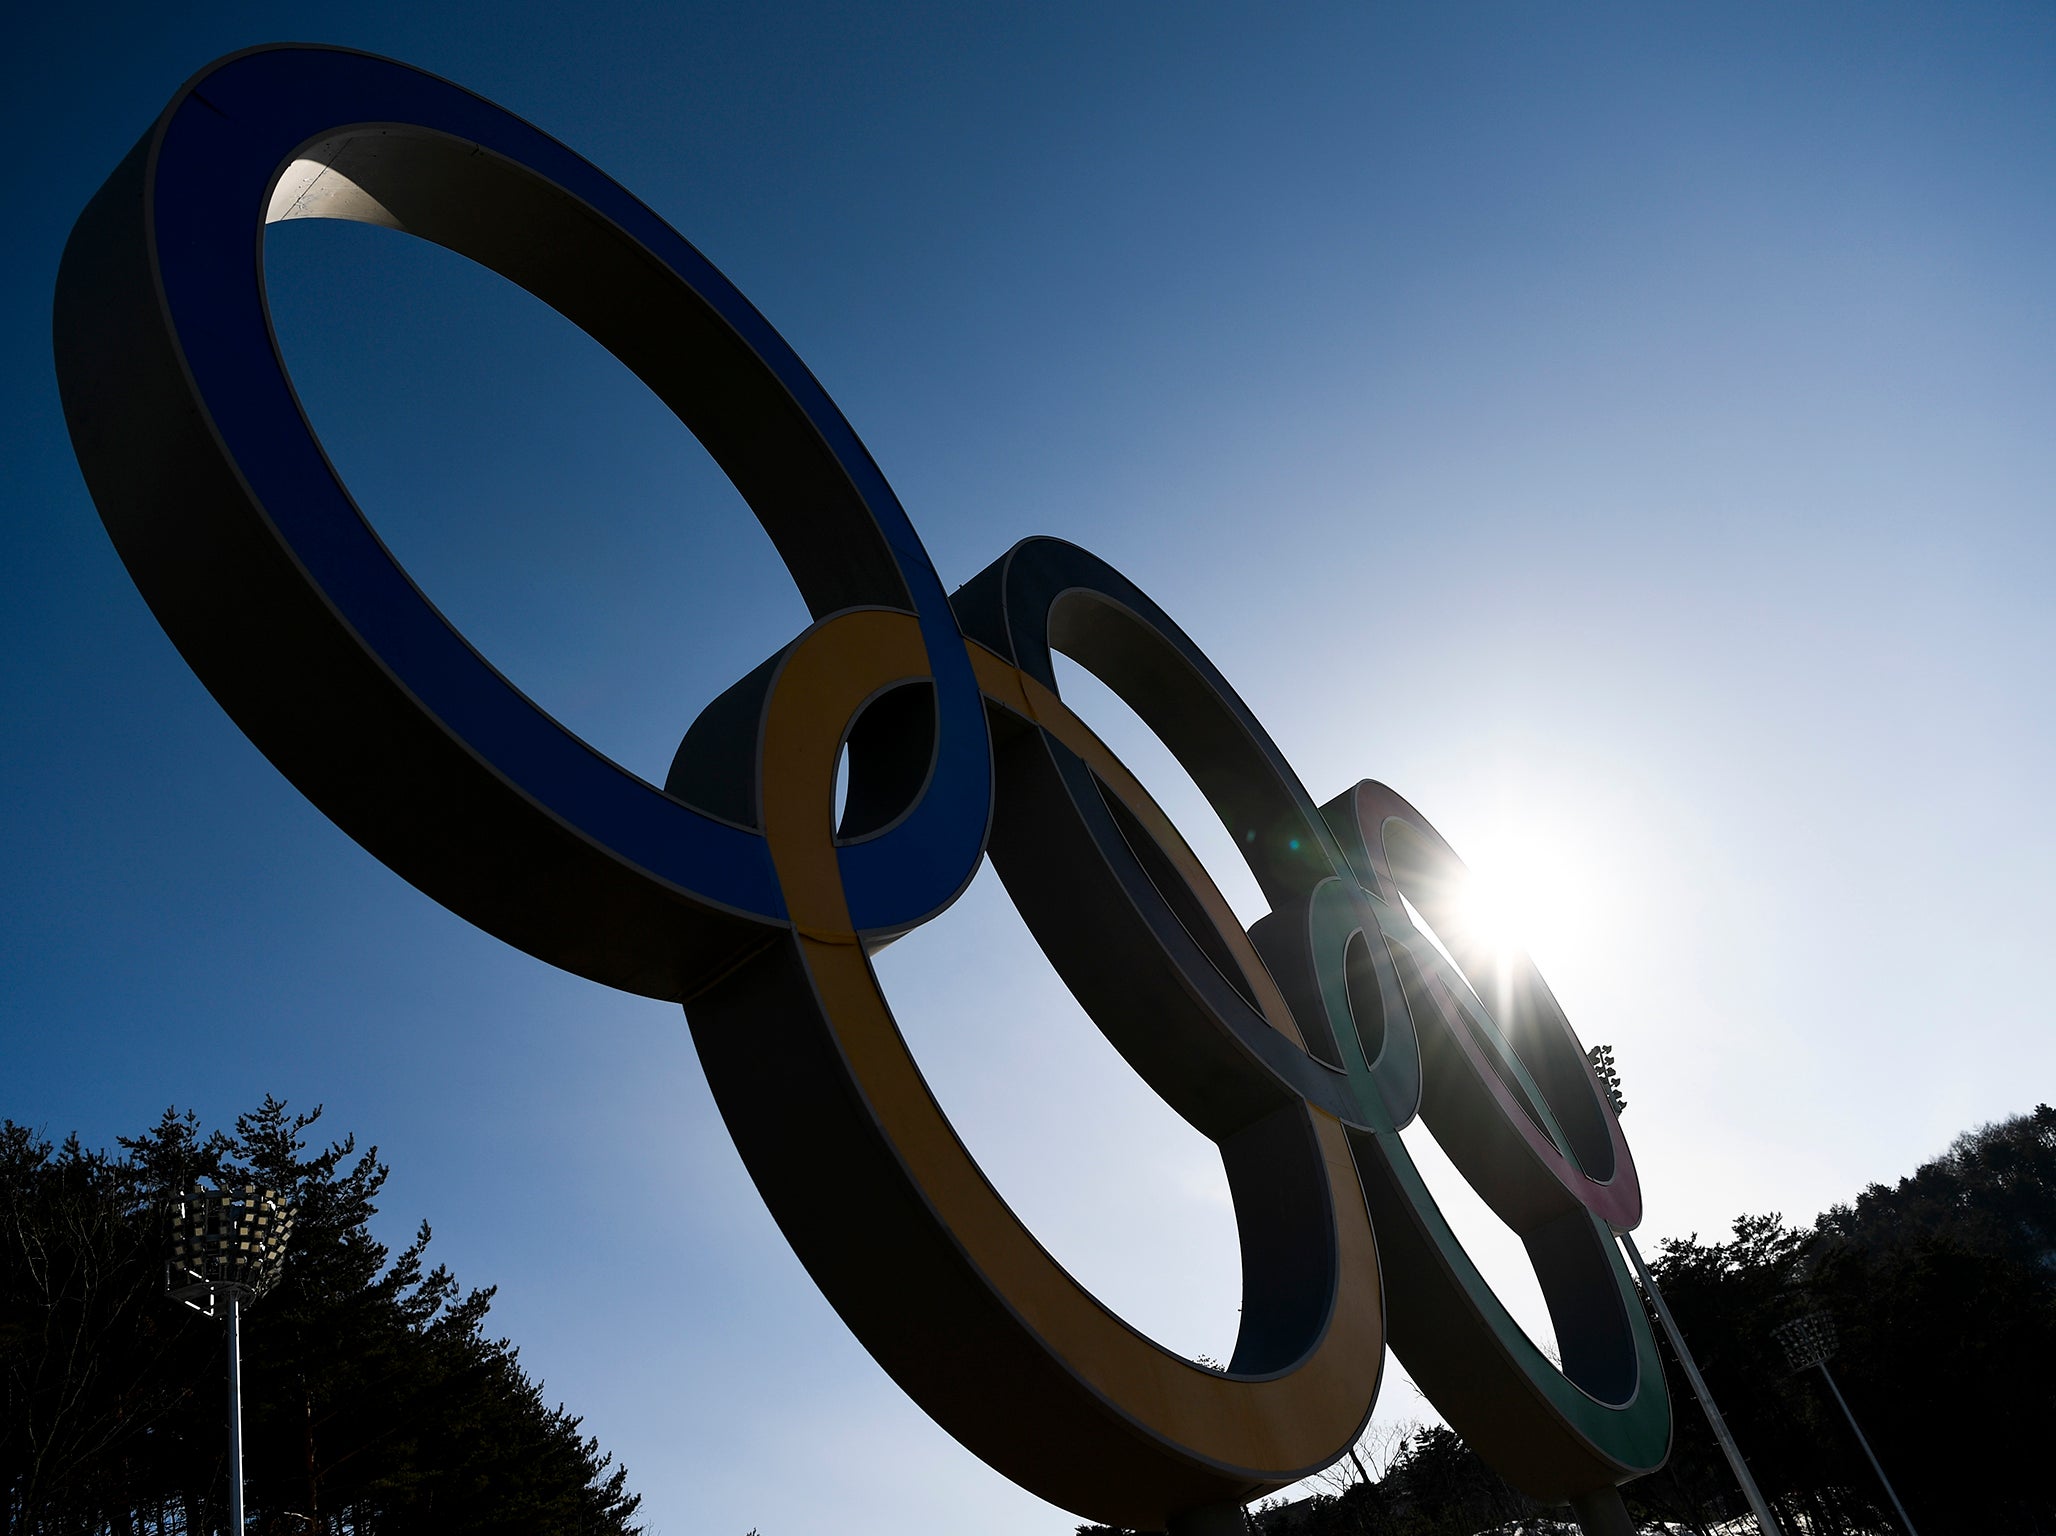 The Olympic movement's roots lie in finding piece between warring regions